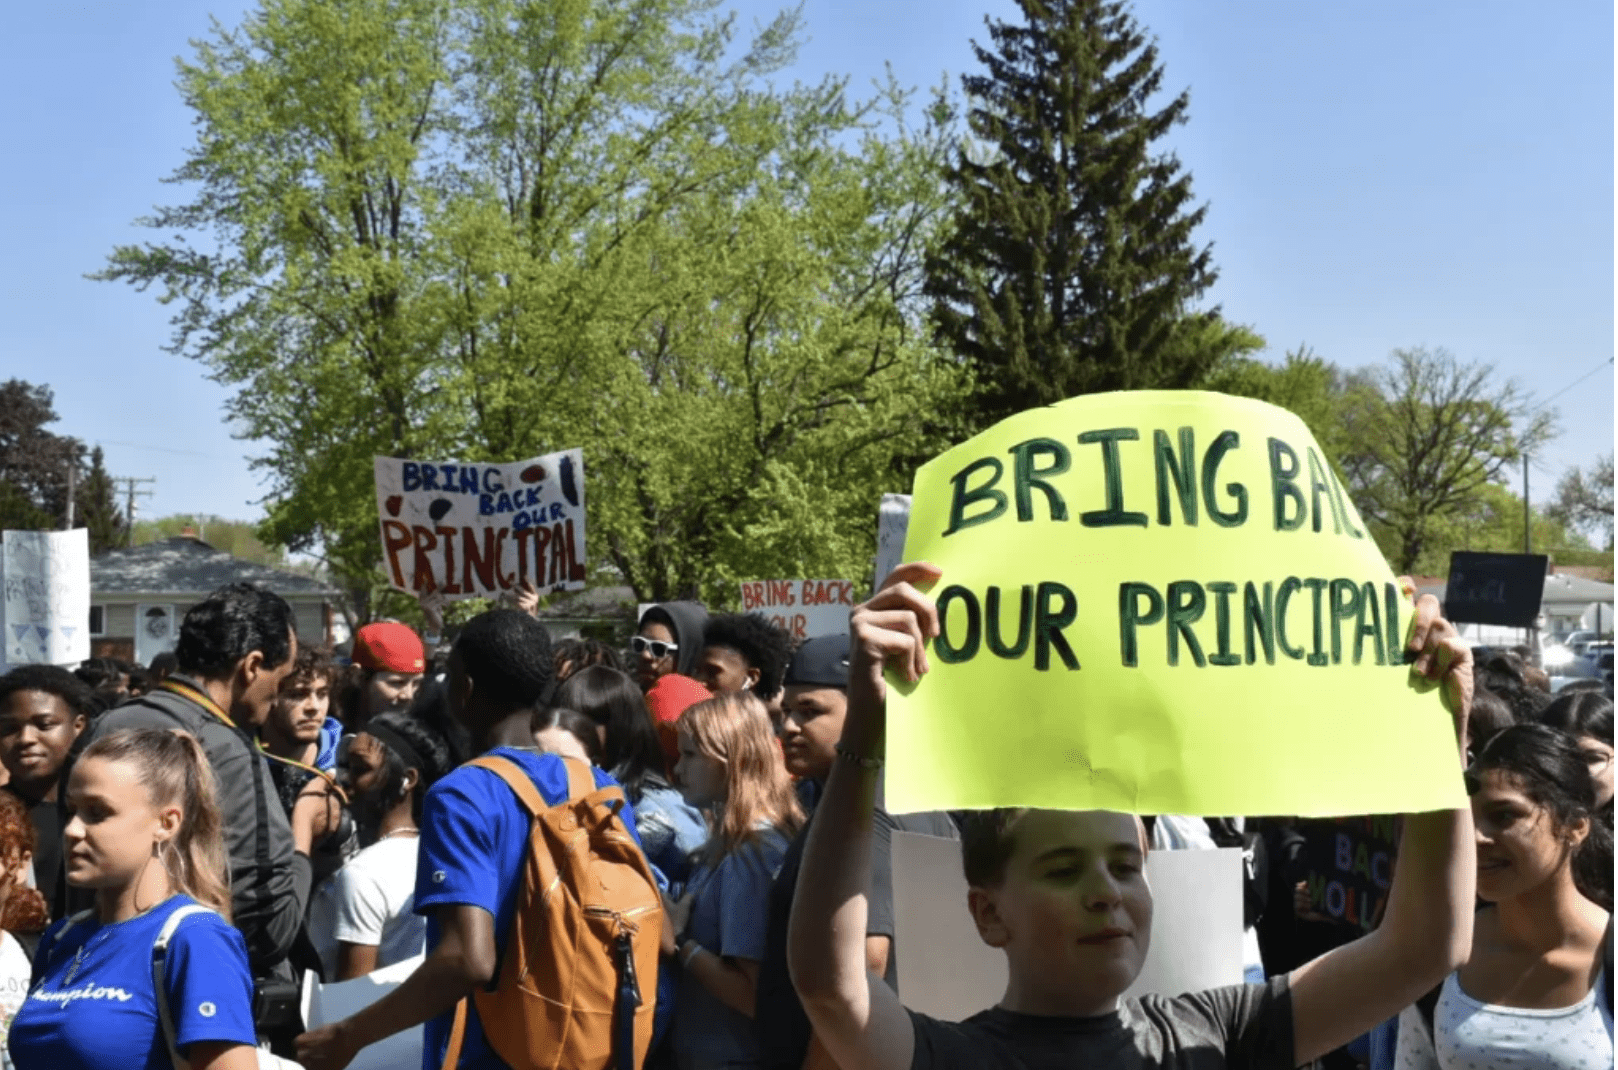 Students pictured at the walkout protesting the suspension of Annapolis High School Principal Aaron Mollett. Photo: Hannah Mackay- The Detroit News